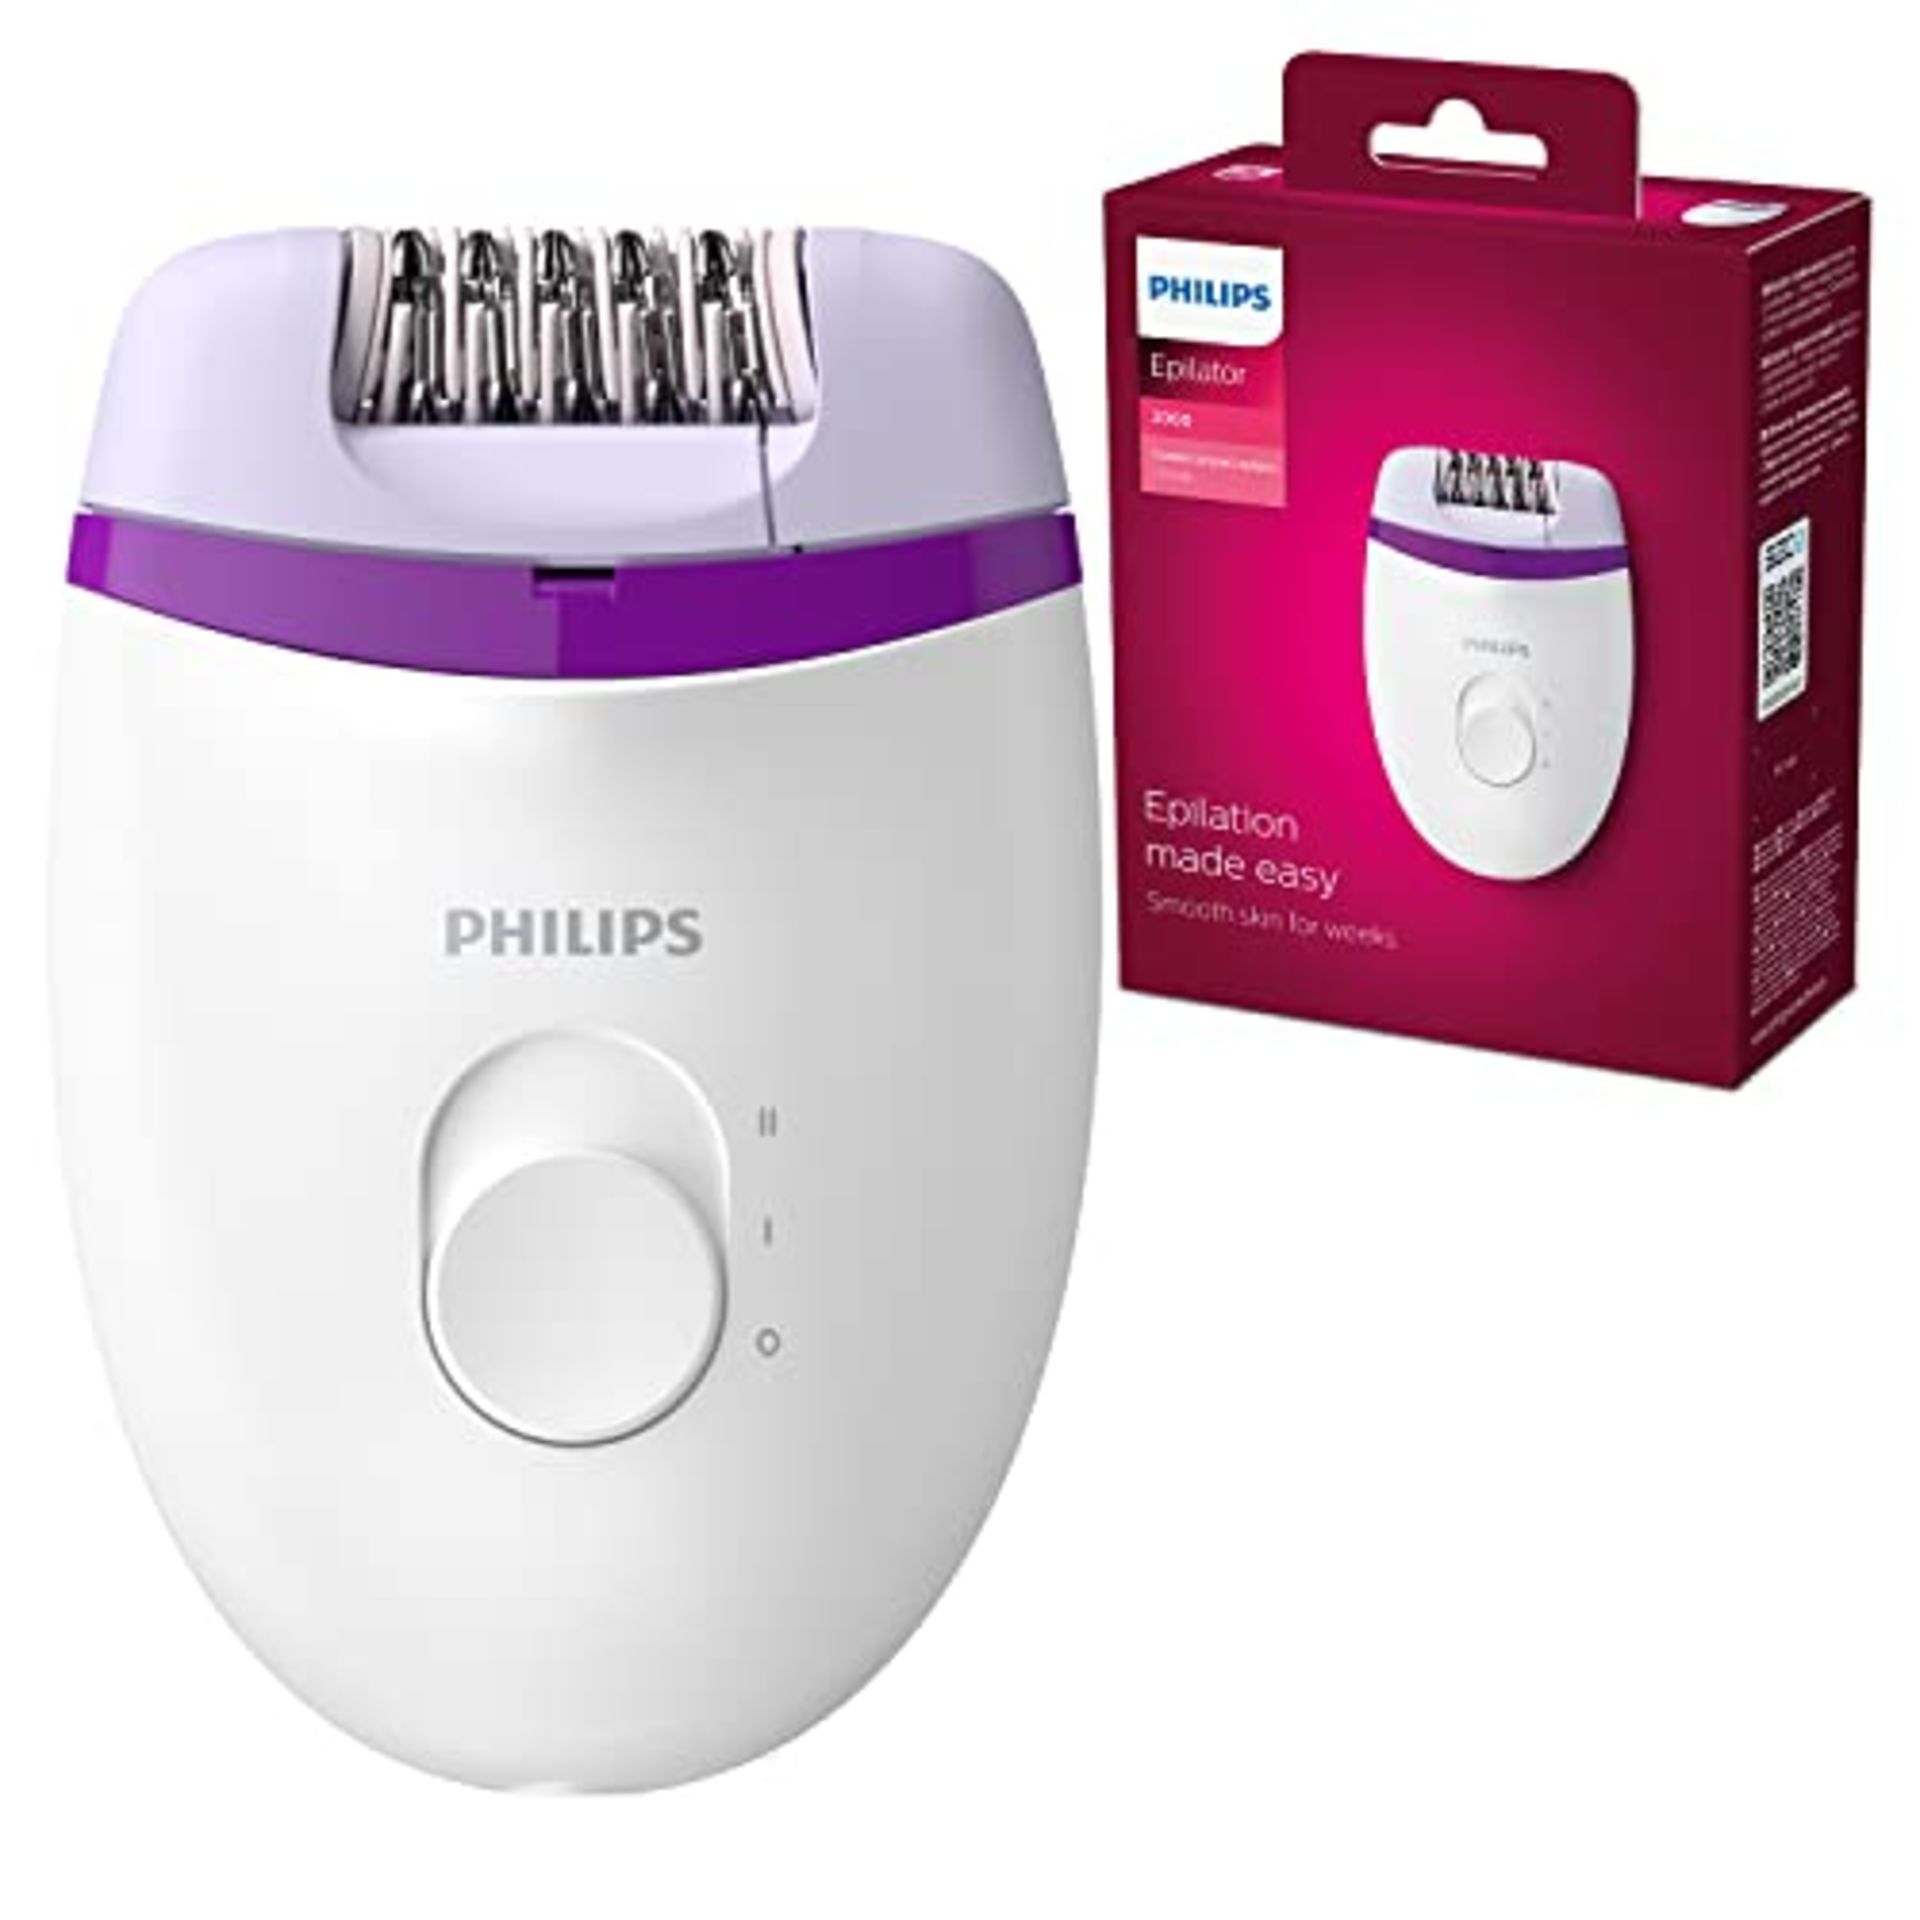 Philips Satinelle Essential Epilator with 21 attachments and 2 speed settings (model B - Image 4 of 6